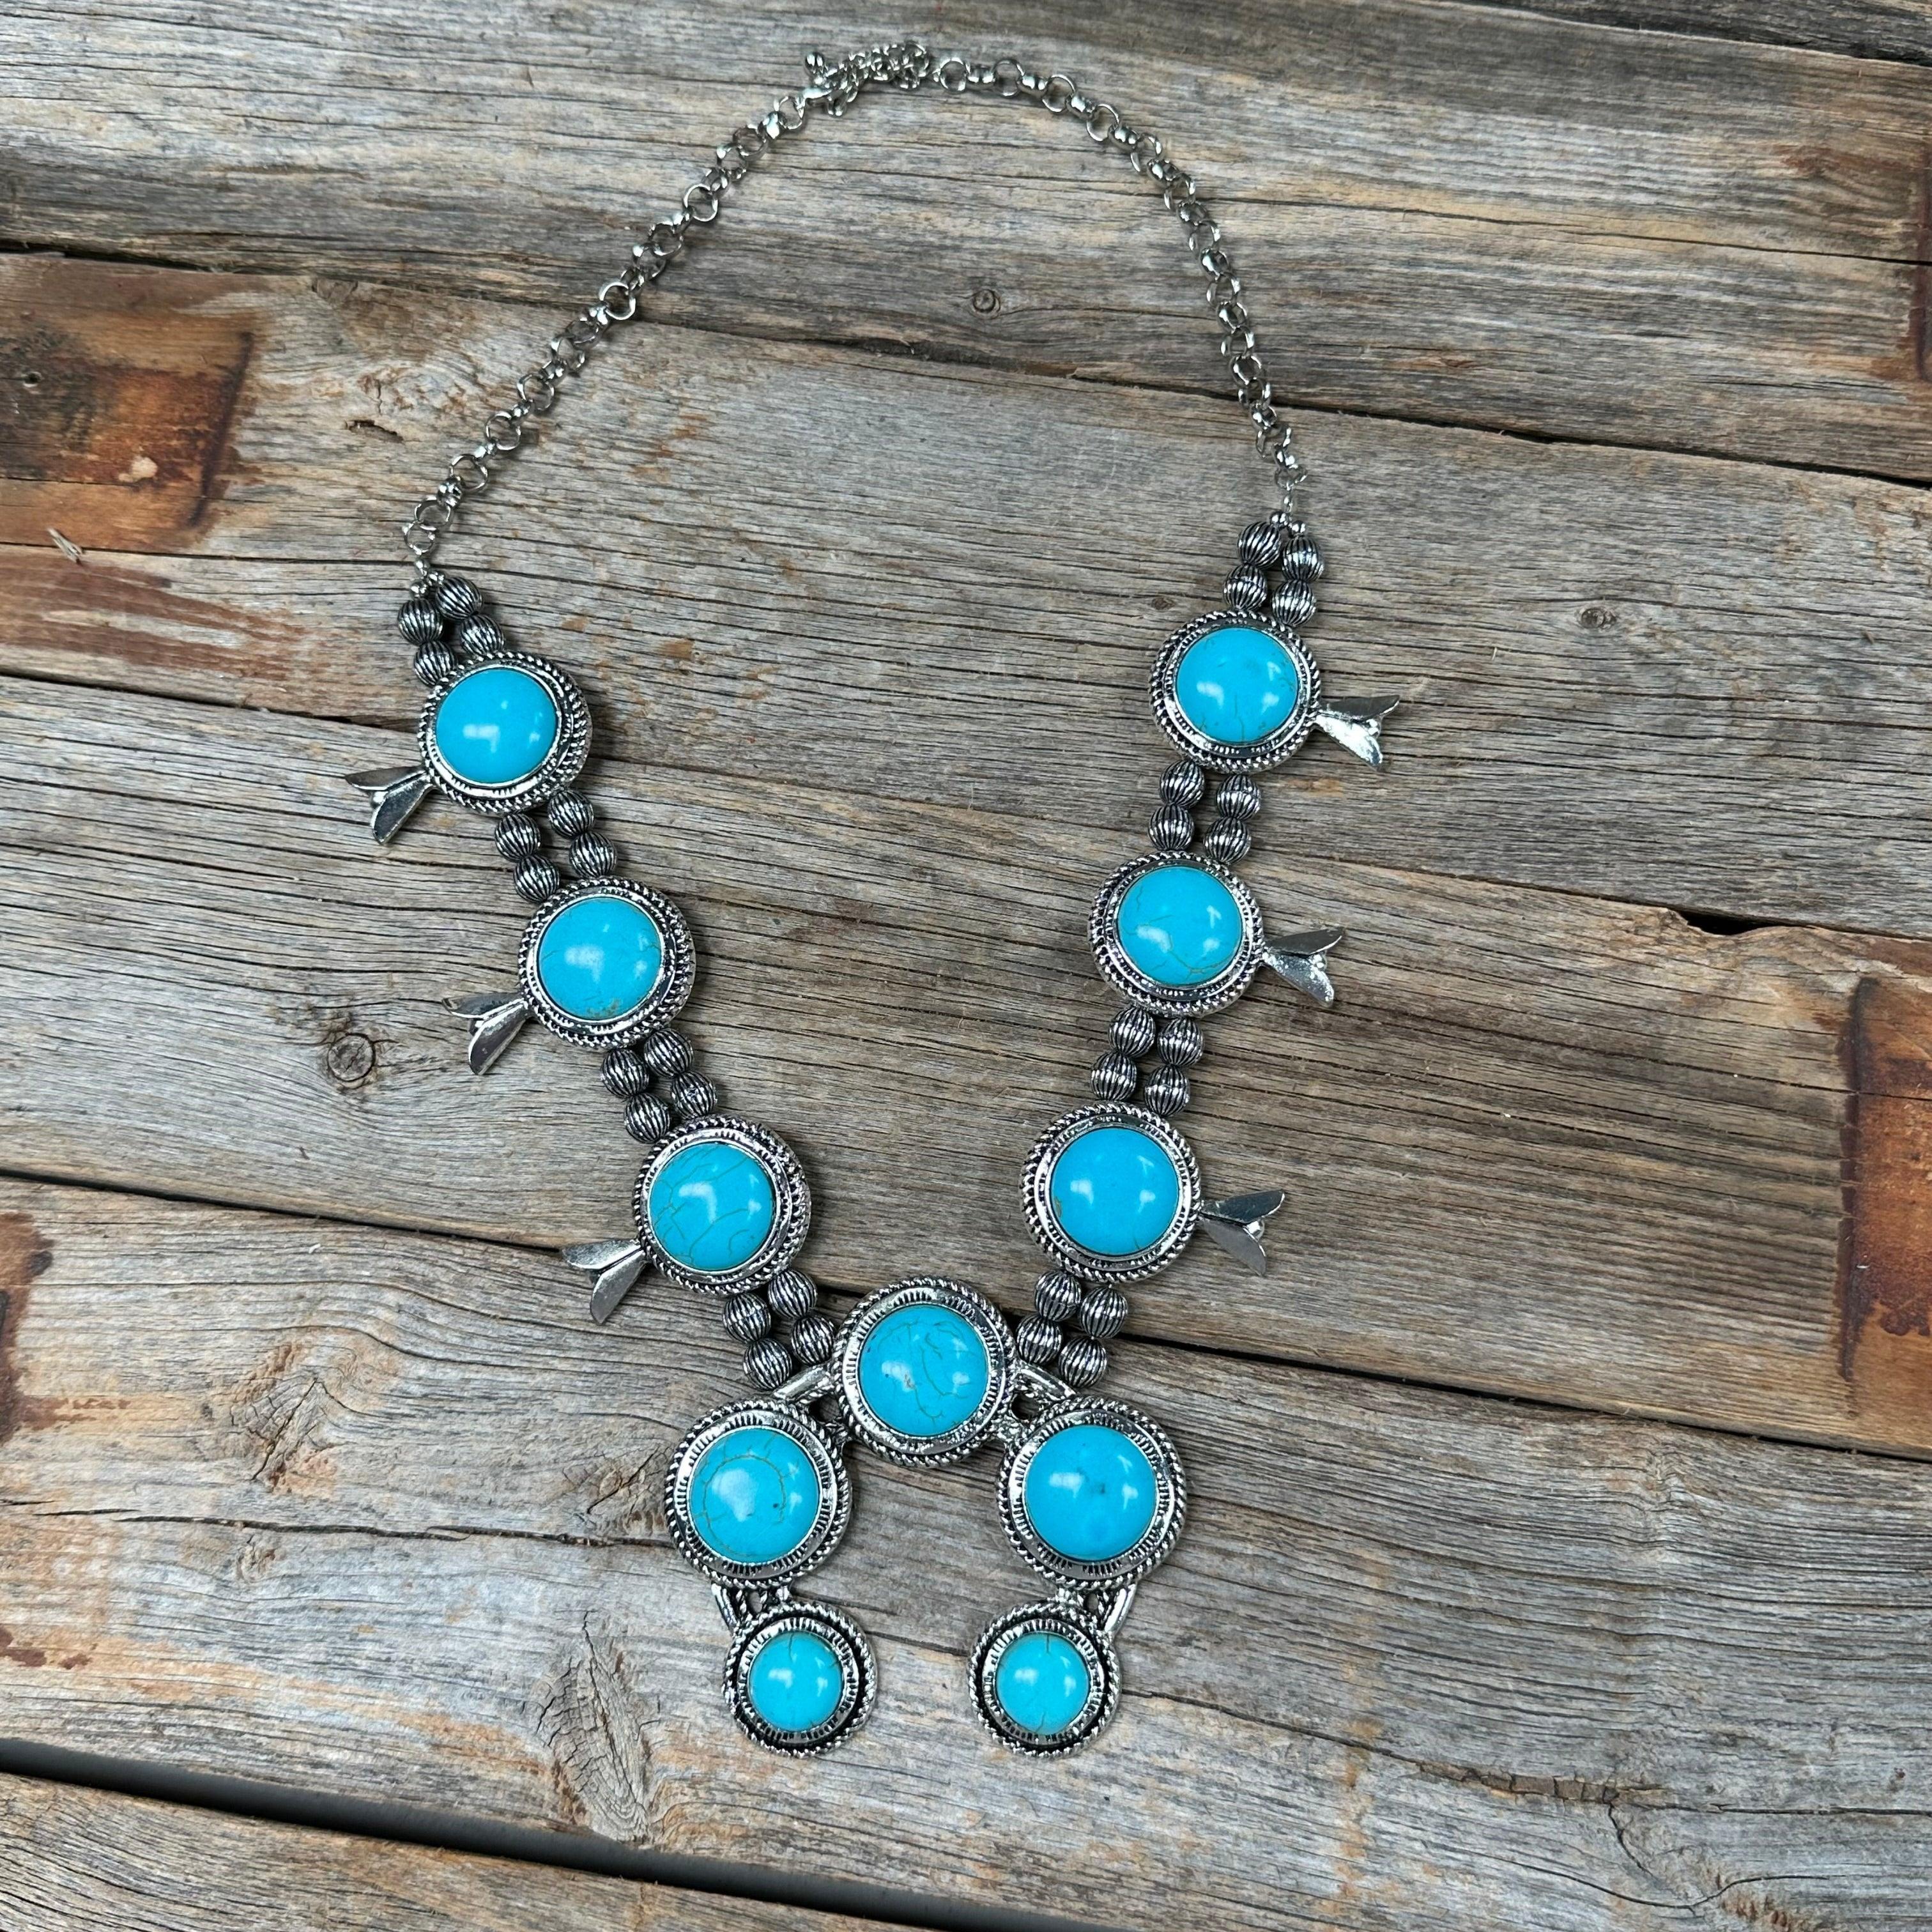 Kendra Scott Harlow Statement Necklace | Horsey Couture